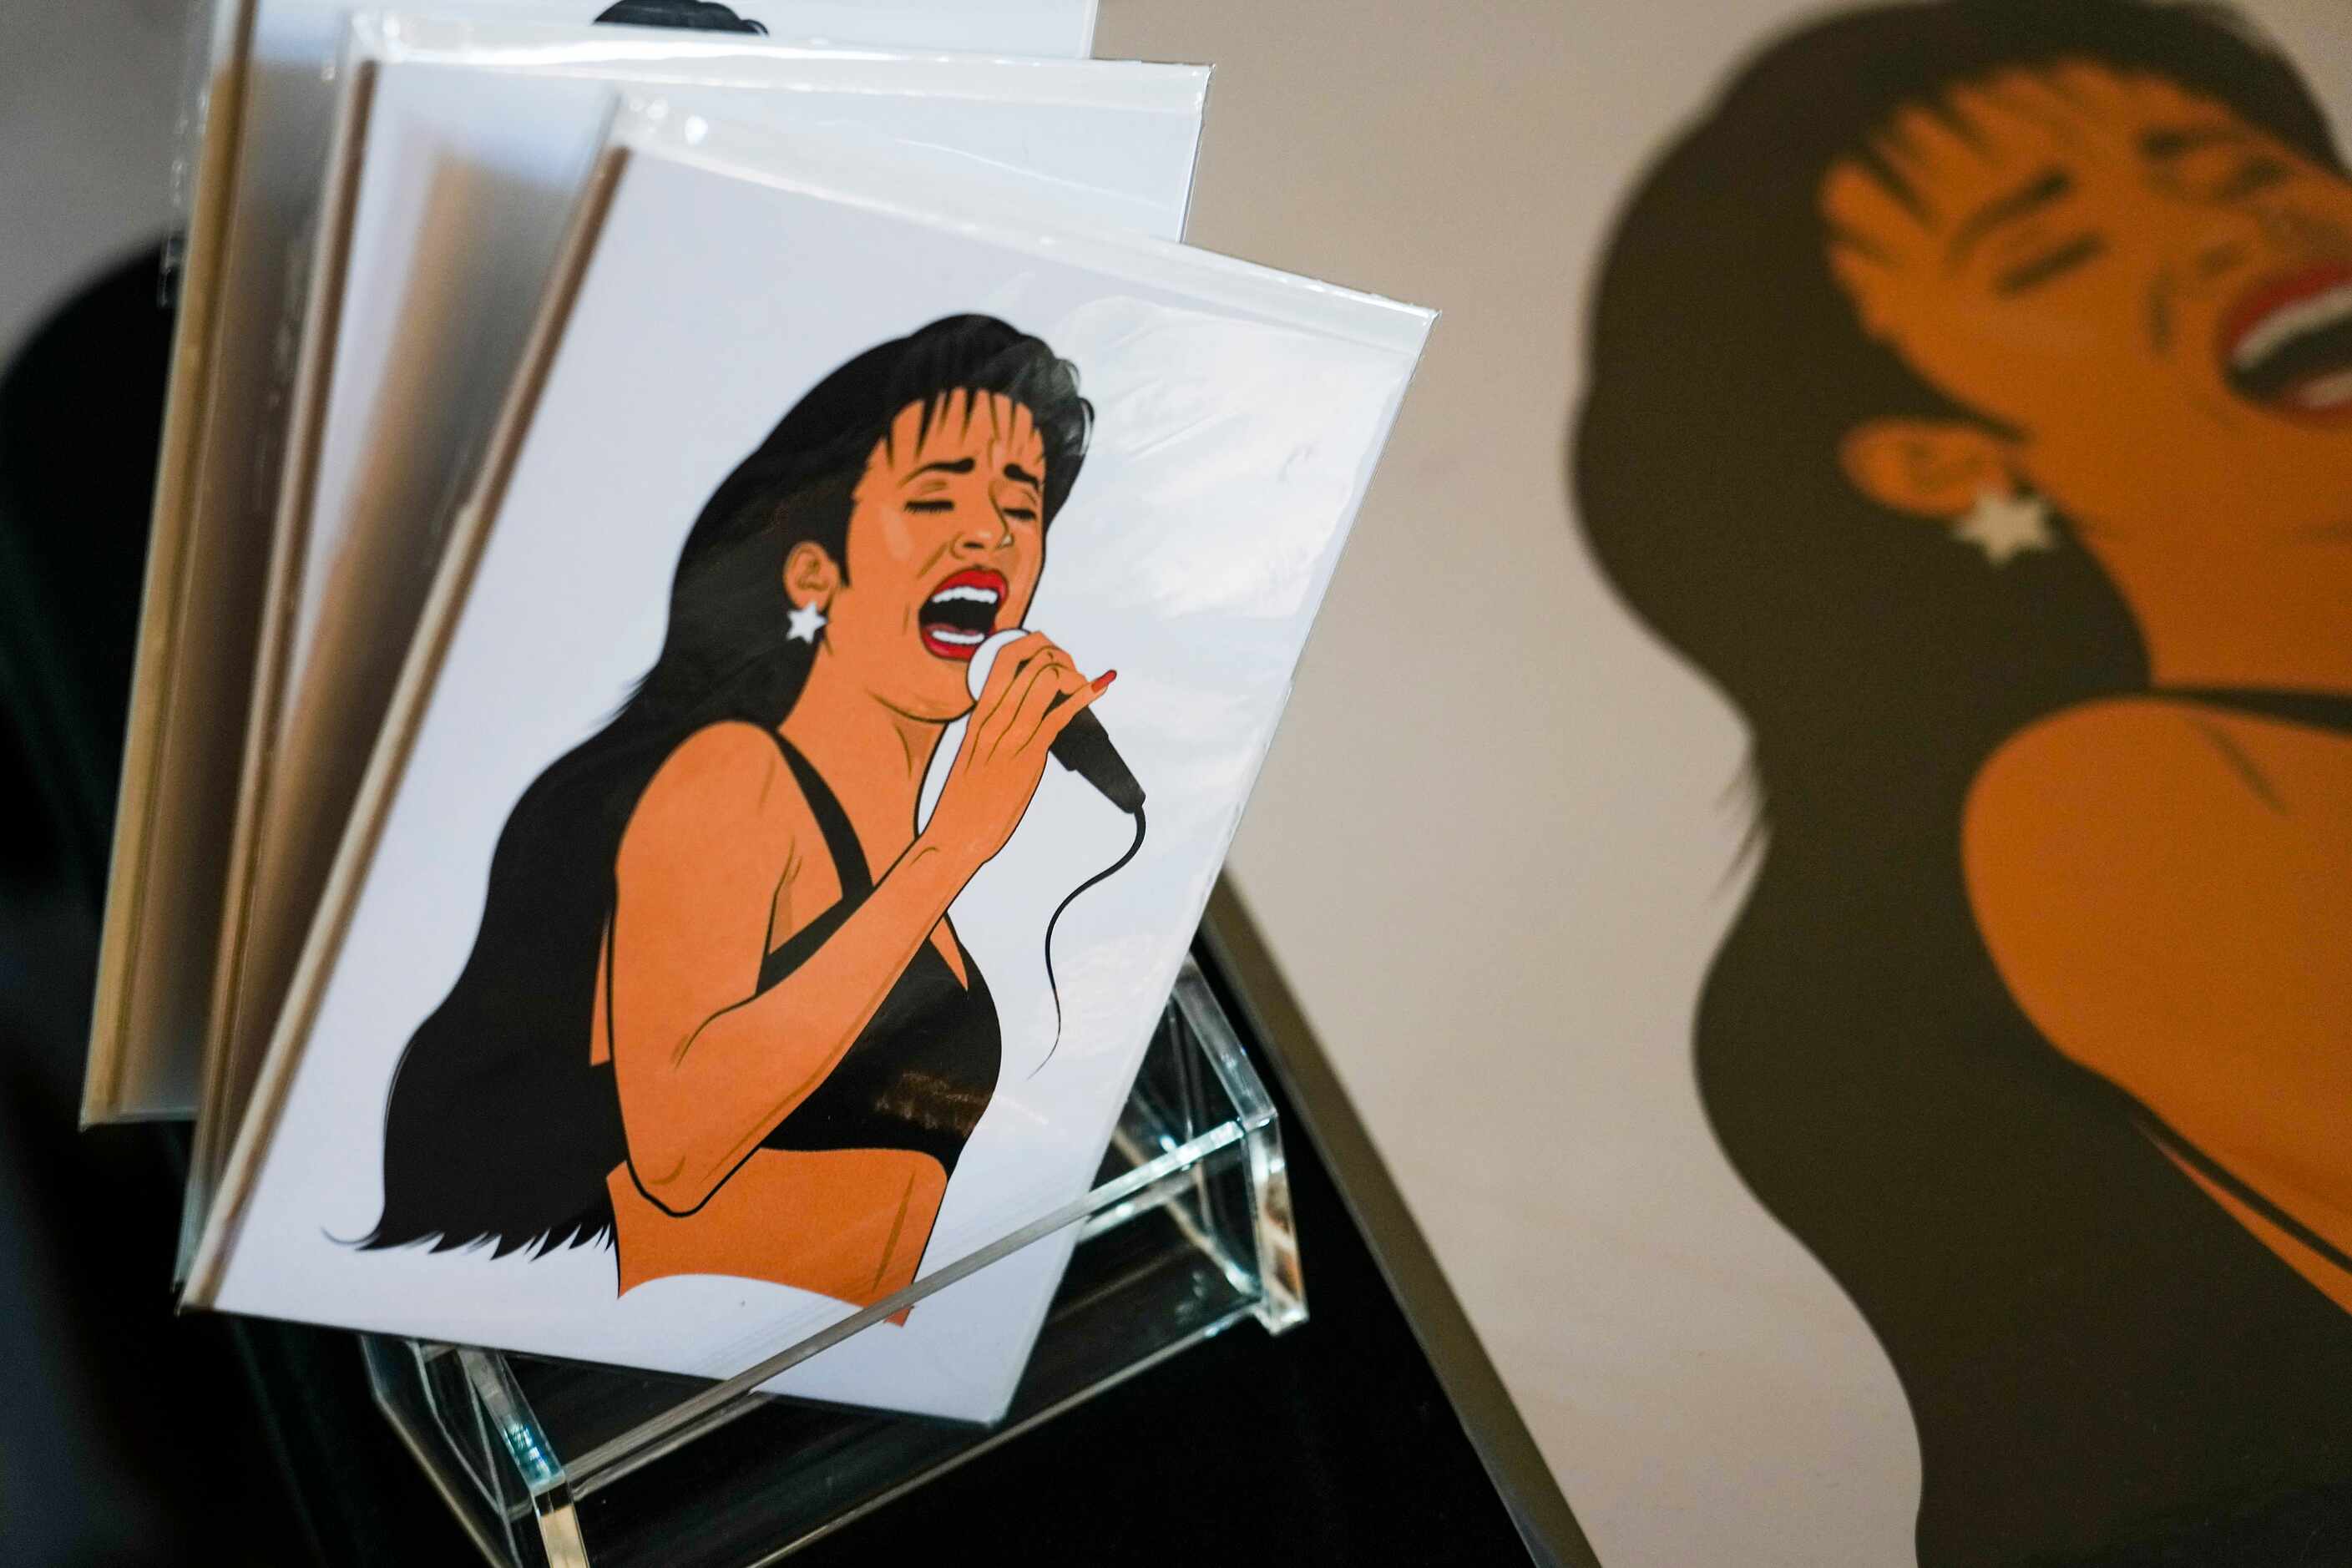 Cars and pictures of Selena Quintanilla-Pérez are seen on a vendor’s table during the...